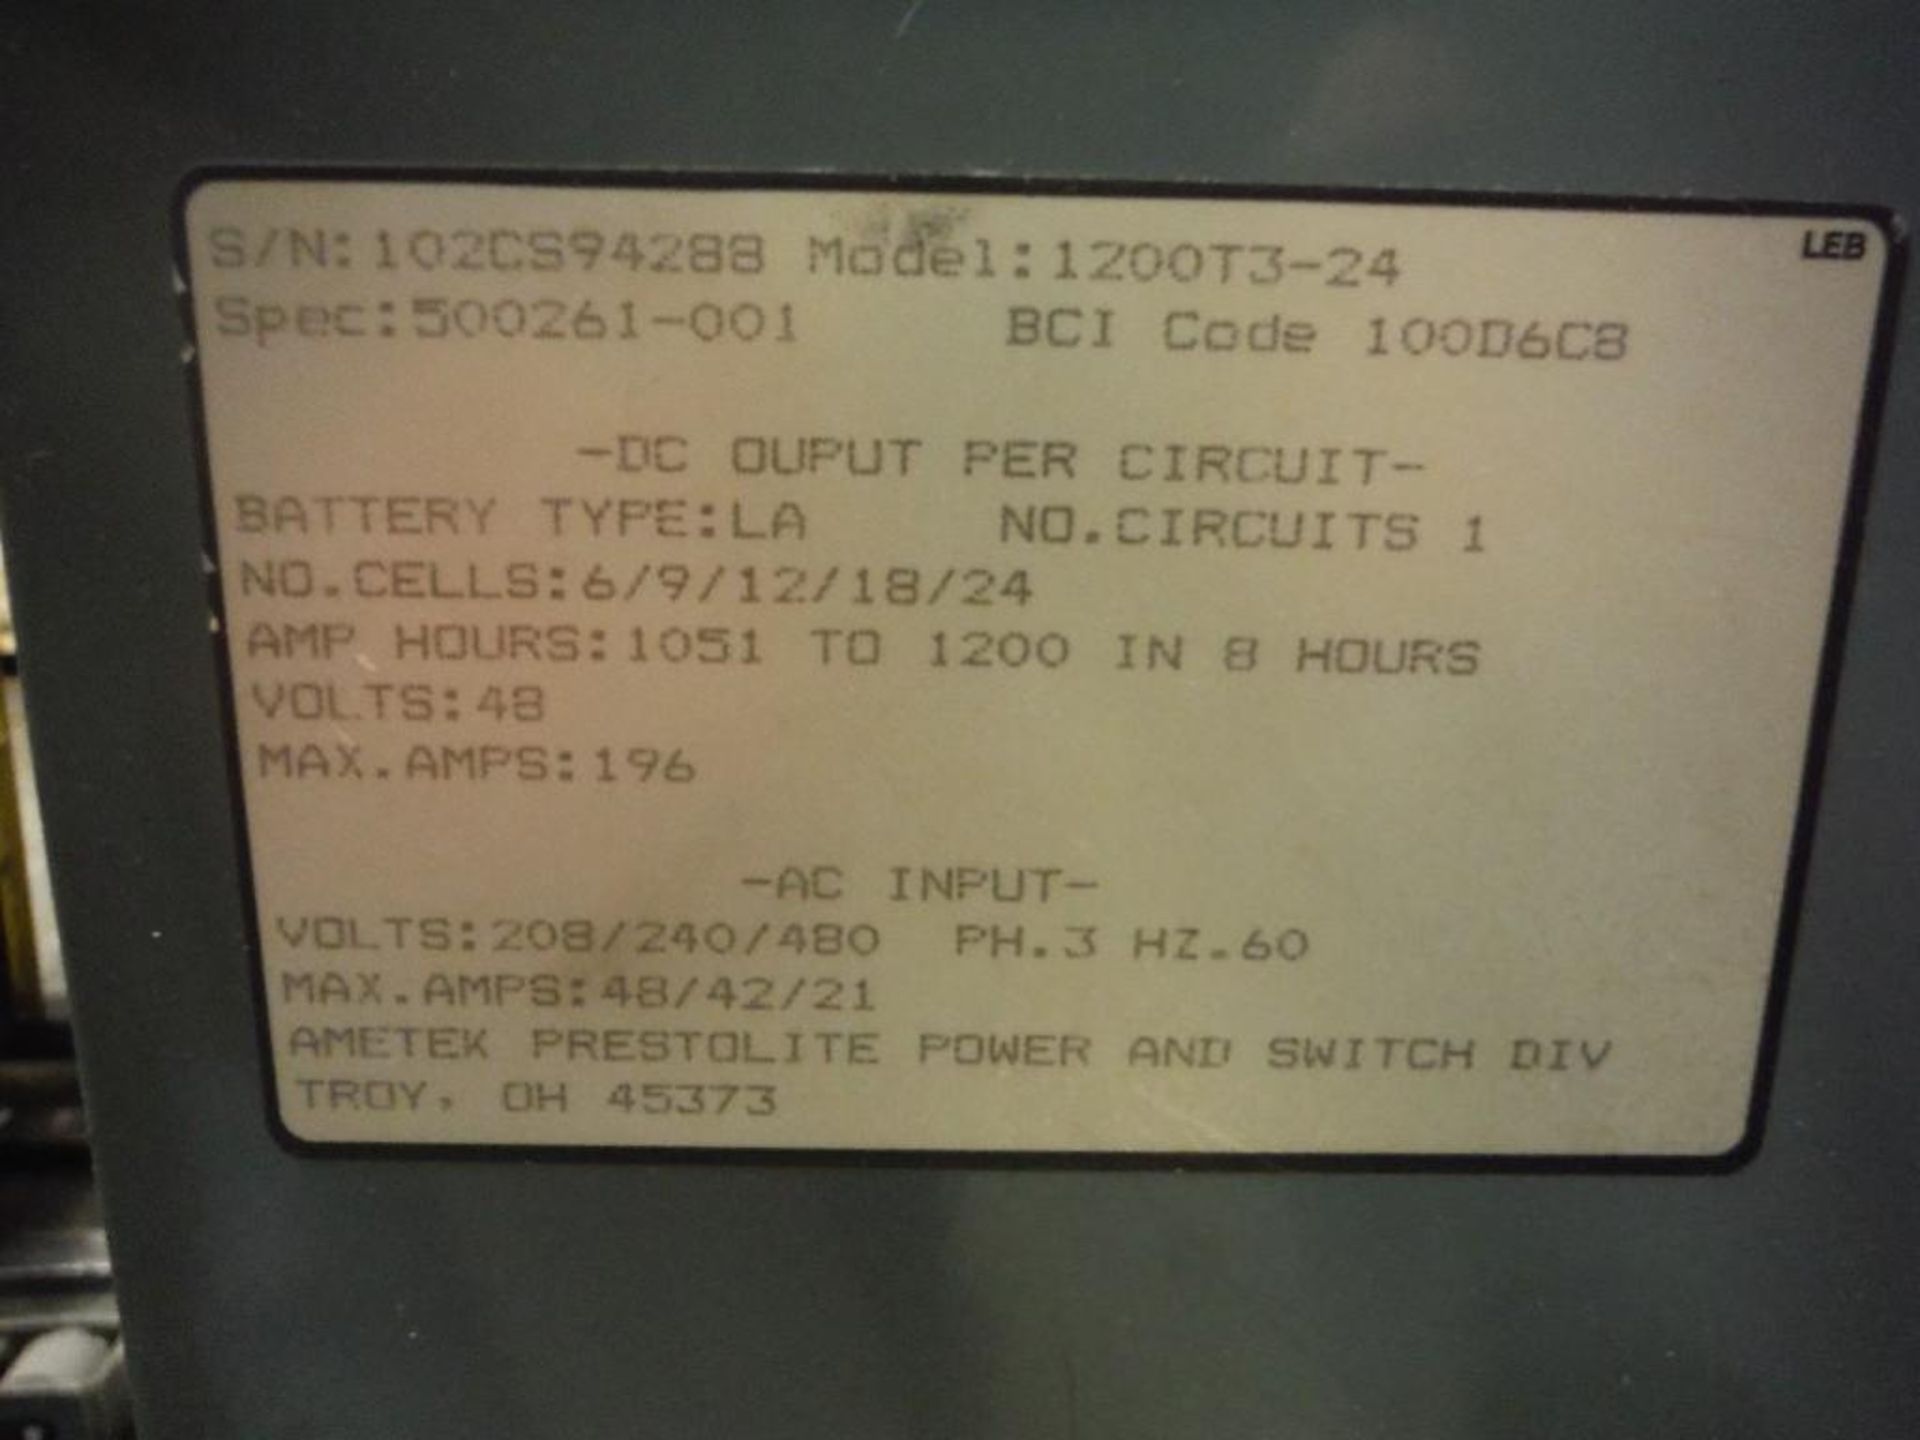 Hobart ultra charge 48 volt battery charger, Model 1200T3-24, SN 102CS94288. DELAYED DELIVERY UNTIL - Image 4 of 4